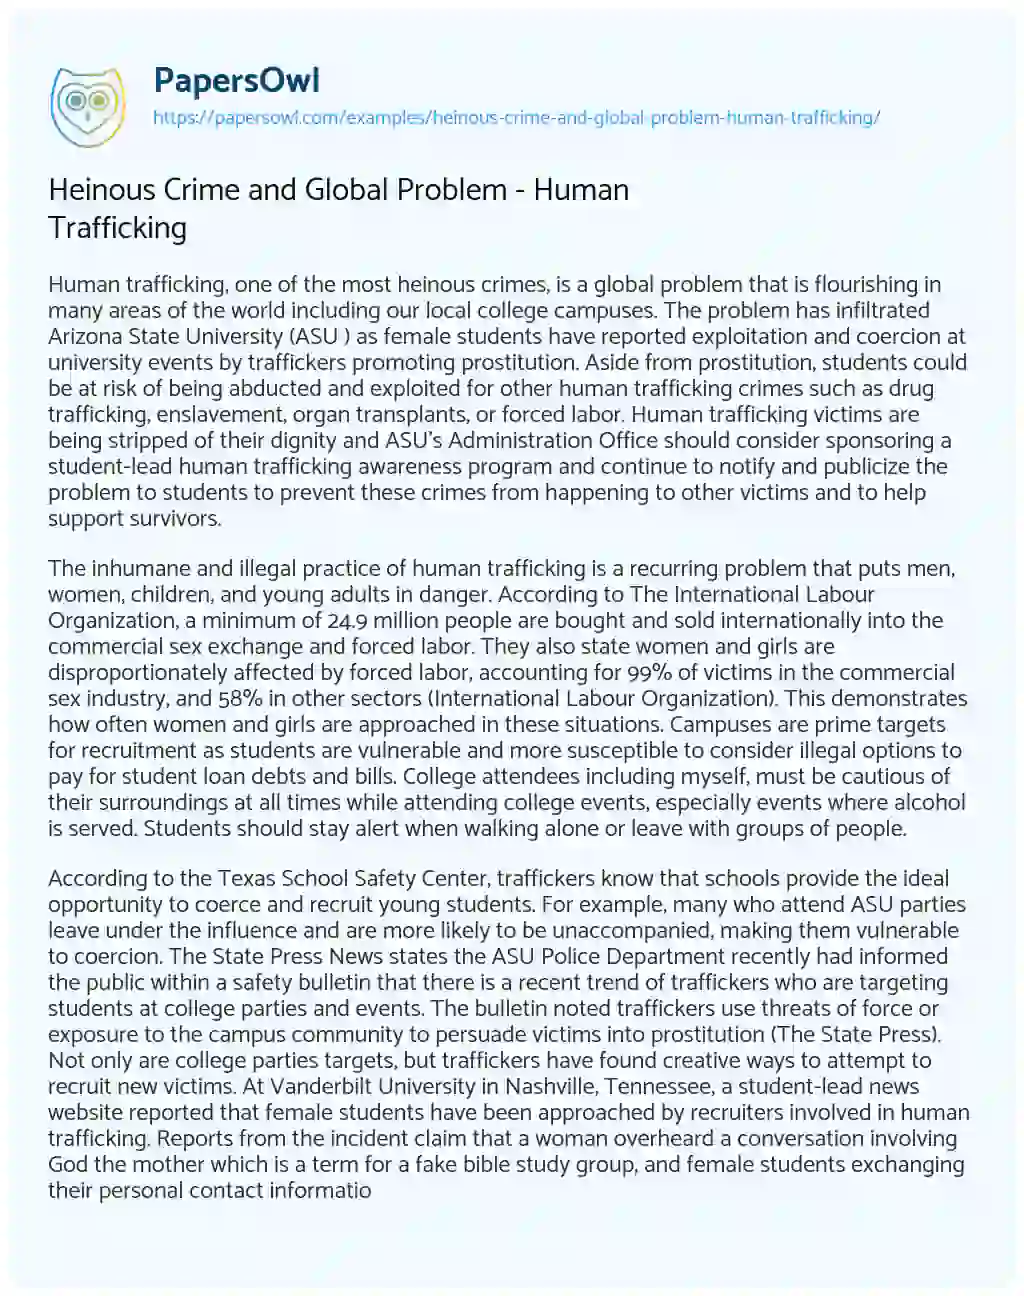 Essay on Heinous Crime and Global Problem – Human Trafficking